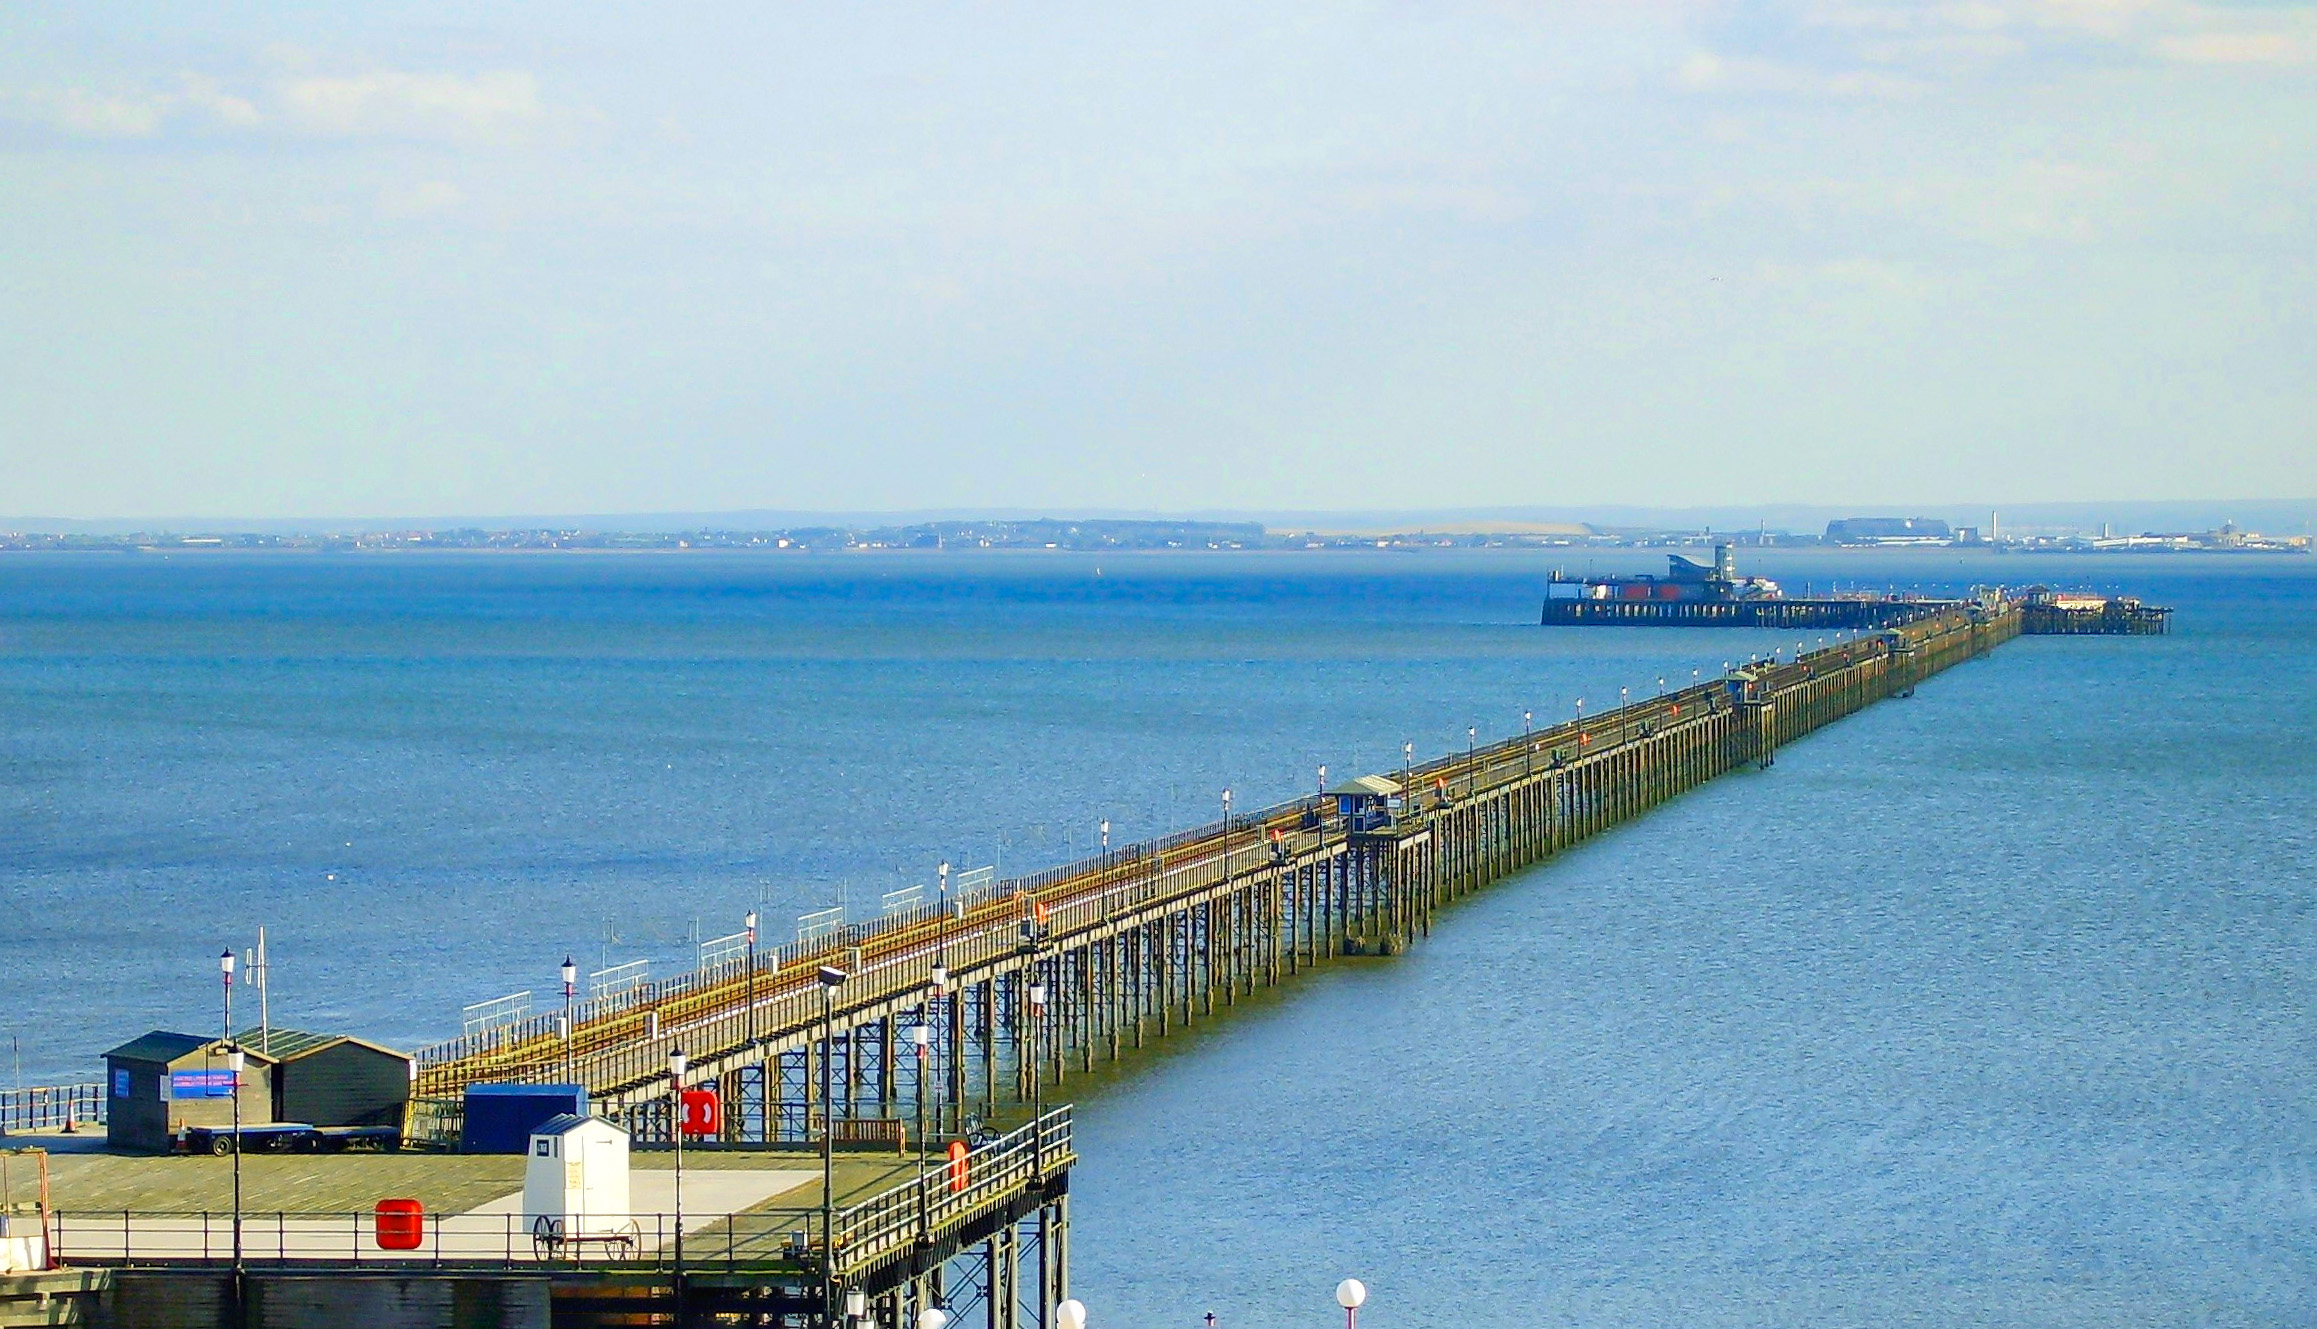 Southend Pier © Damian Dukarski - licence [CC BY-SA 3.0] from Wikimedia Commons